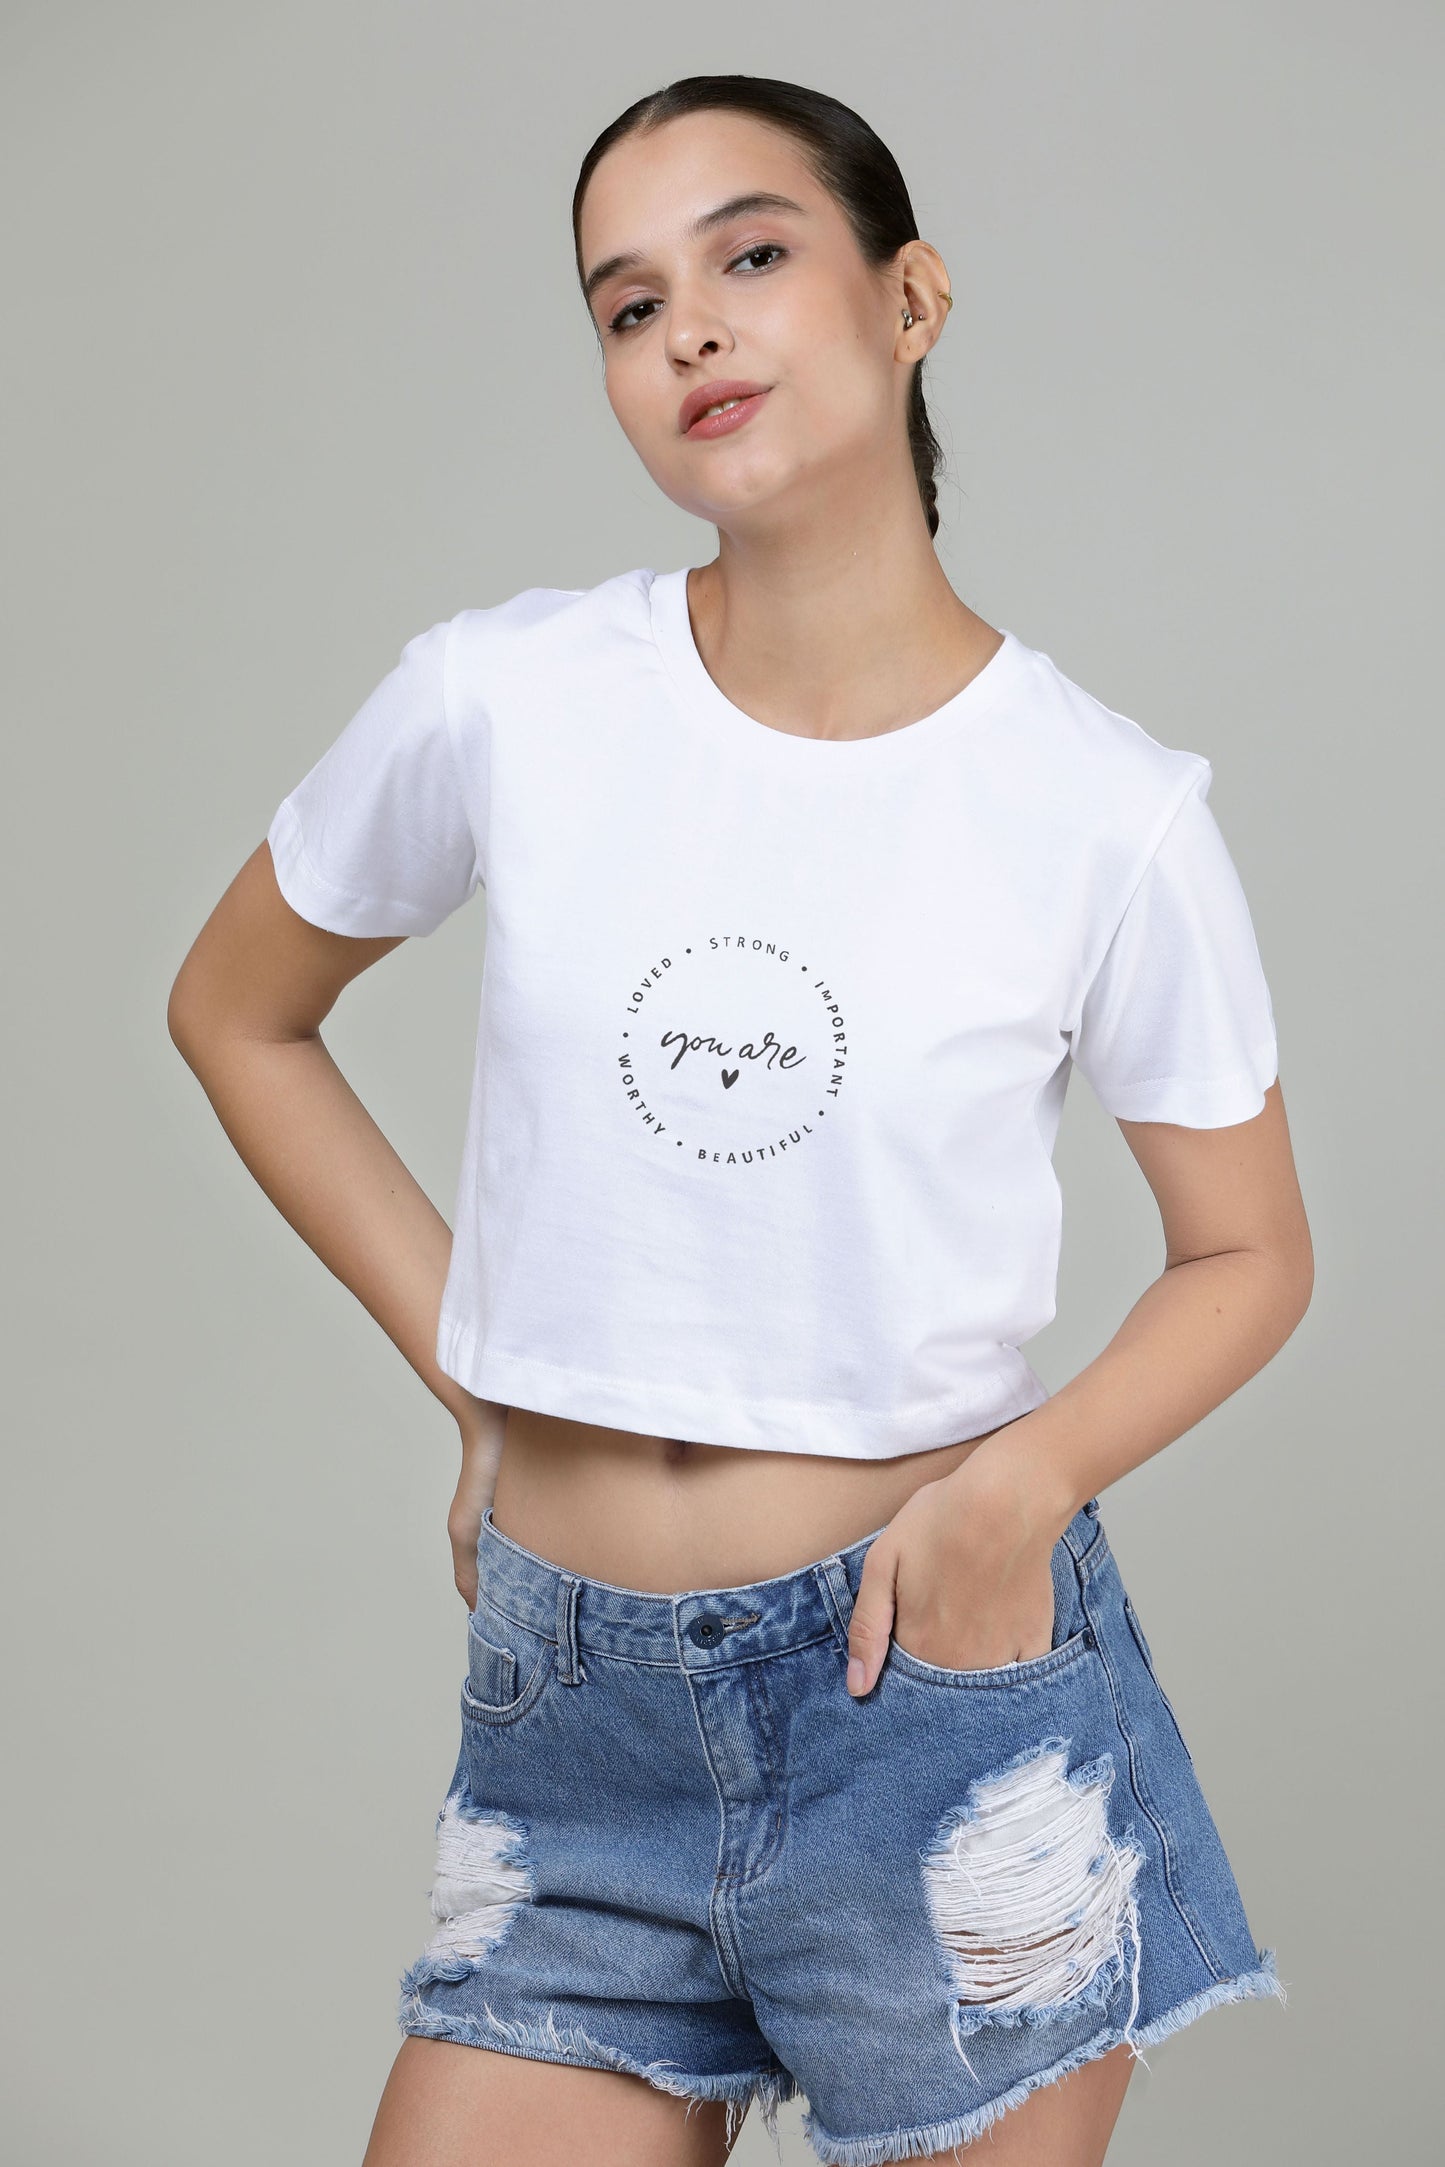 You are Worthy - Printed Crop Top